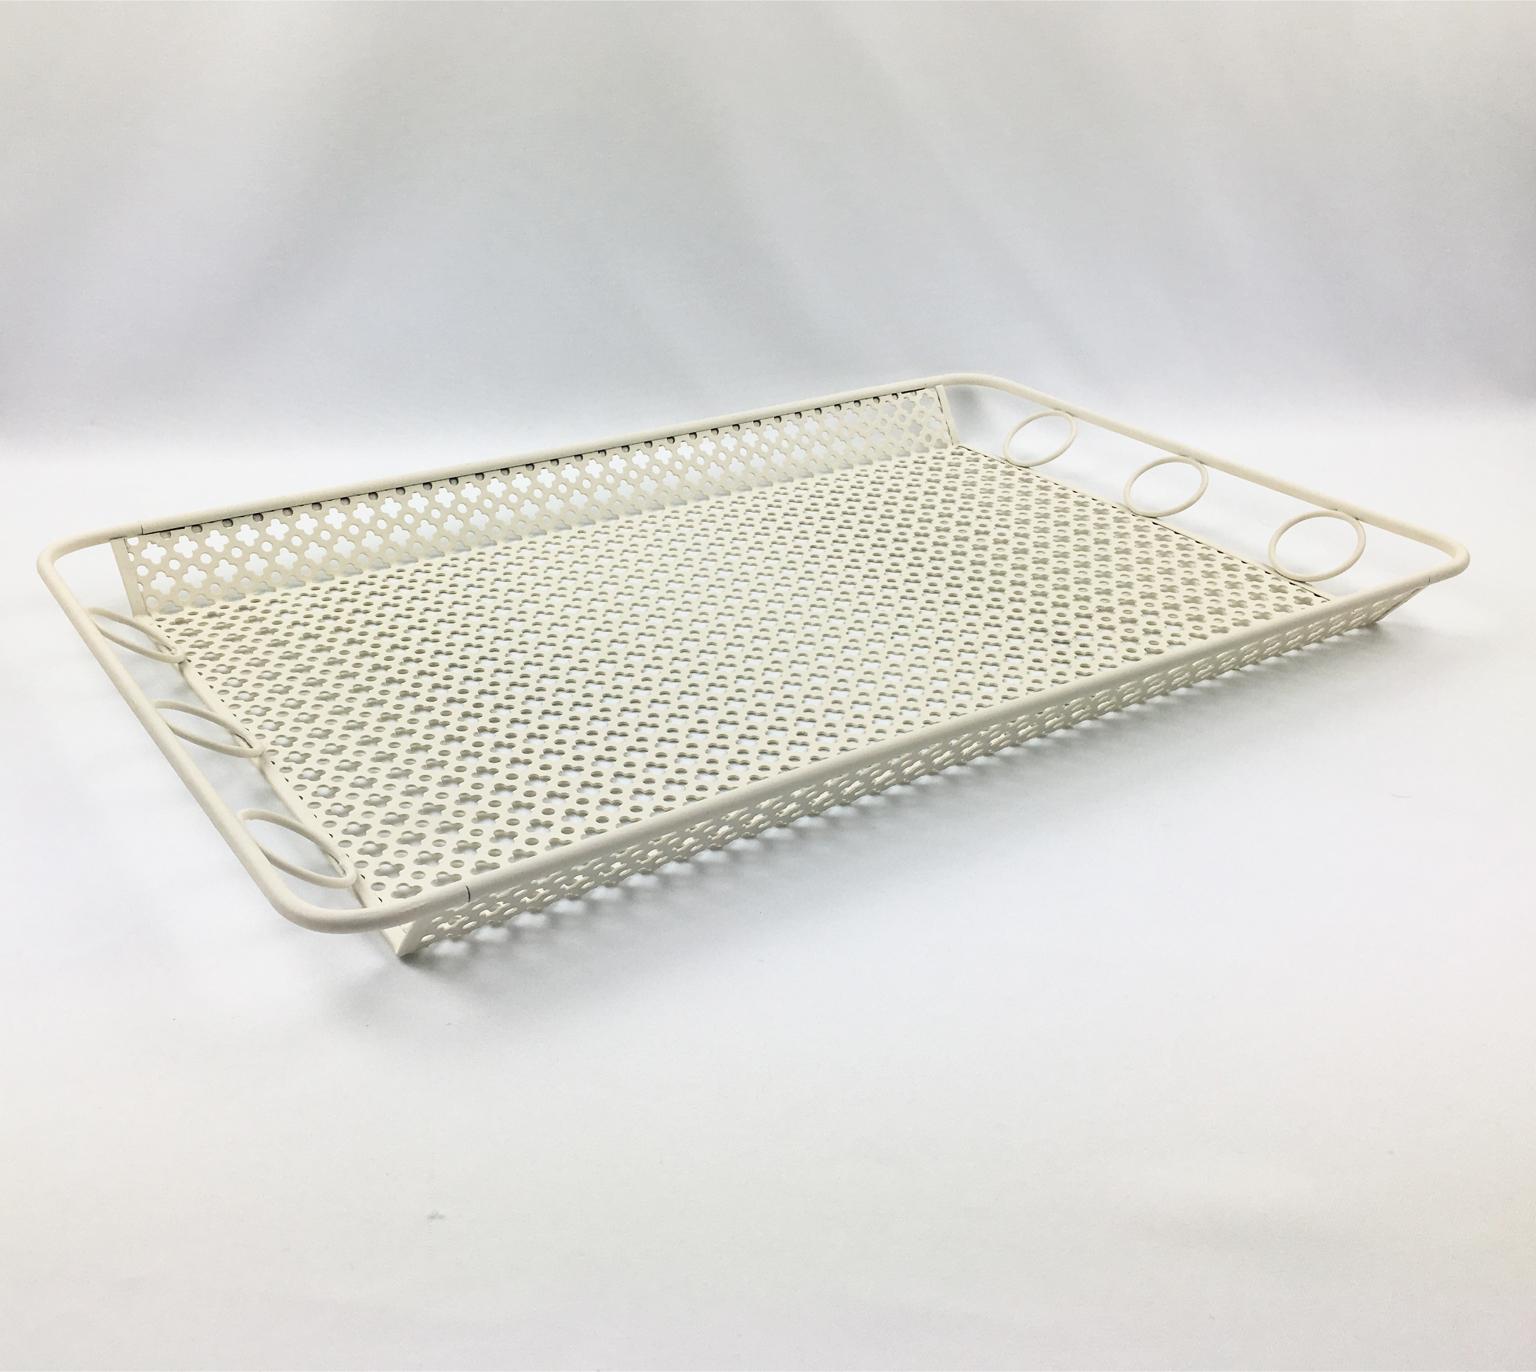 Exquisite French designer Mathieu Mategot large barware serving tray. A striking example of French 1950s metalwork. Mid-Century modernist shape, featuring folded and perforated off-white lacquered metal rectangular serving tray or platter.